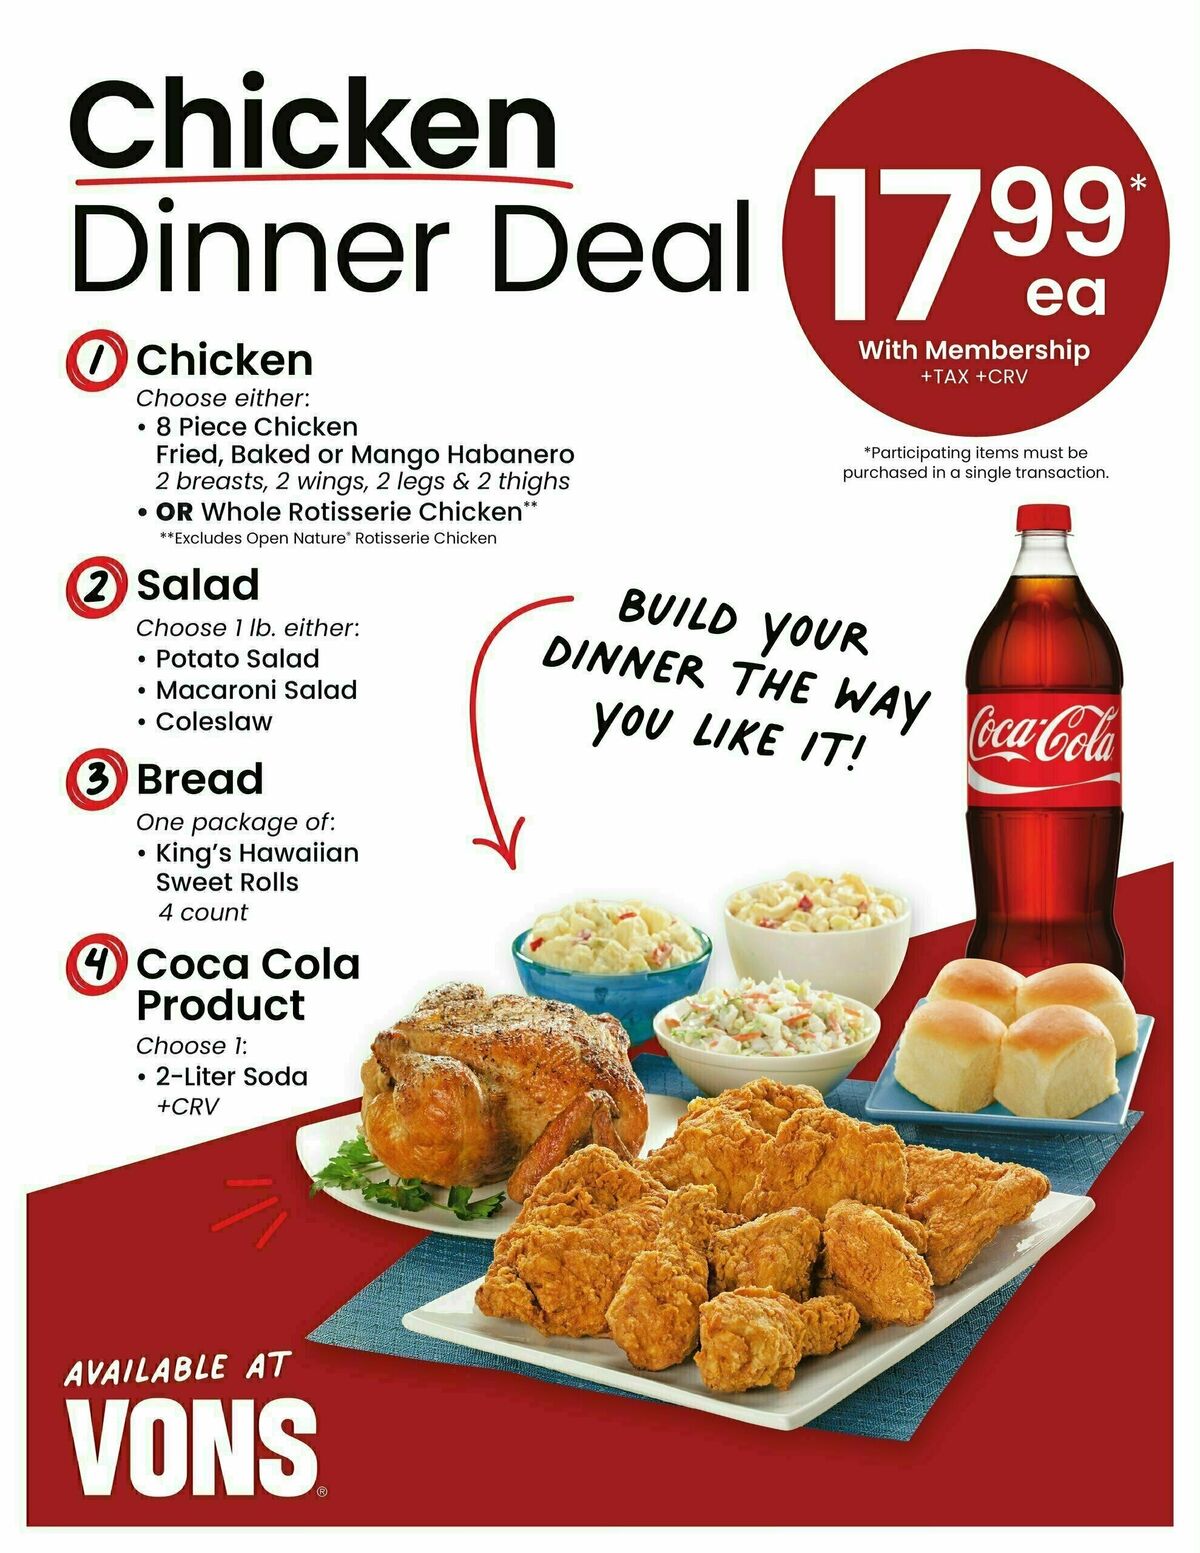 Vons Chicken Dinner Deal Weekly Ad from April 22